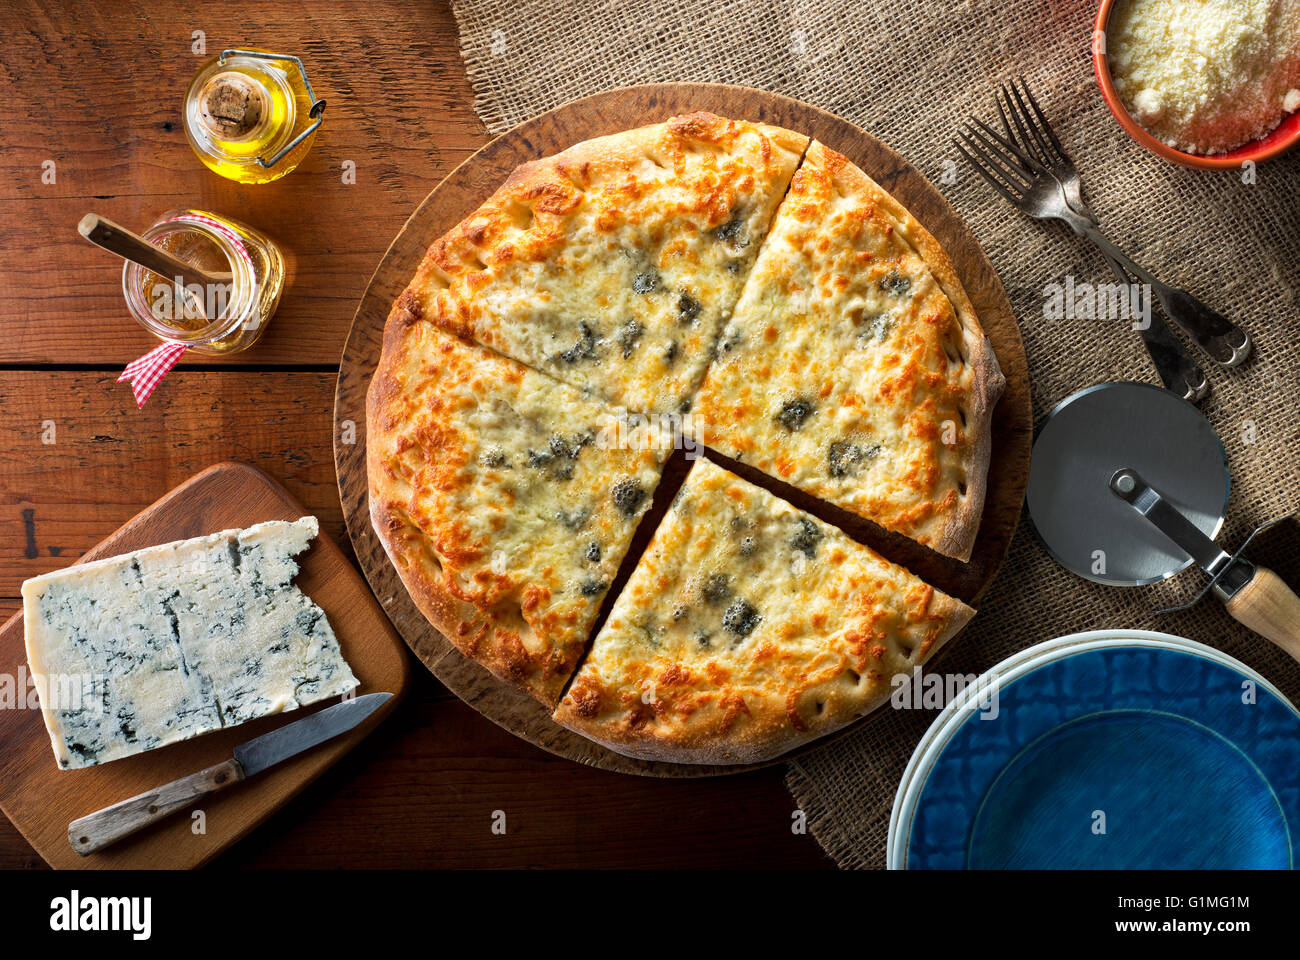 A delicious home made gourmet pizza with gorgonzola blue cheese. Stock Photo